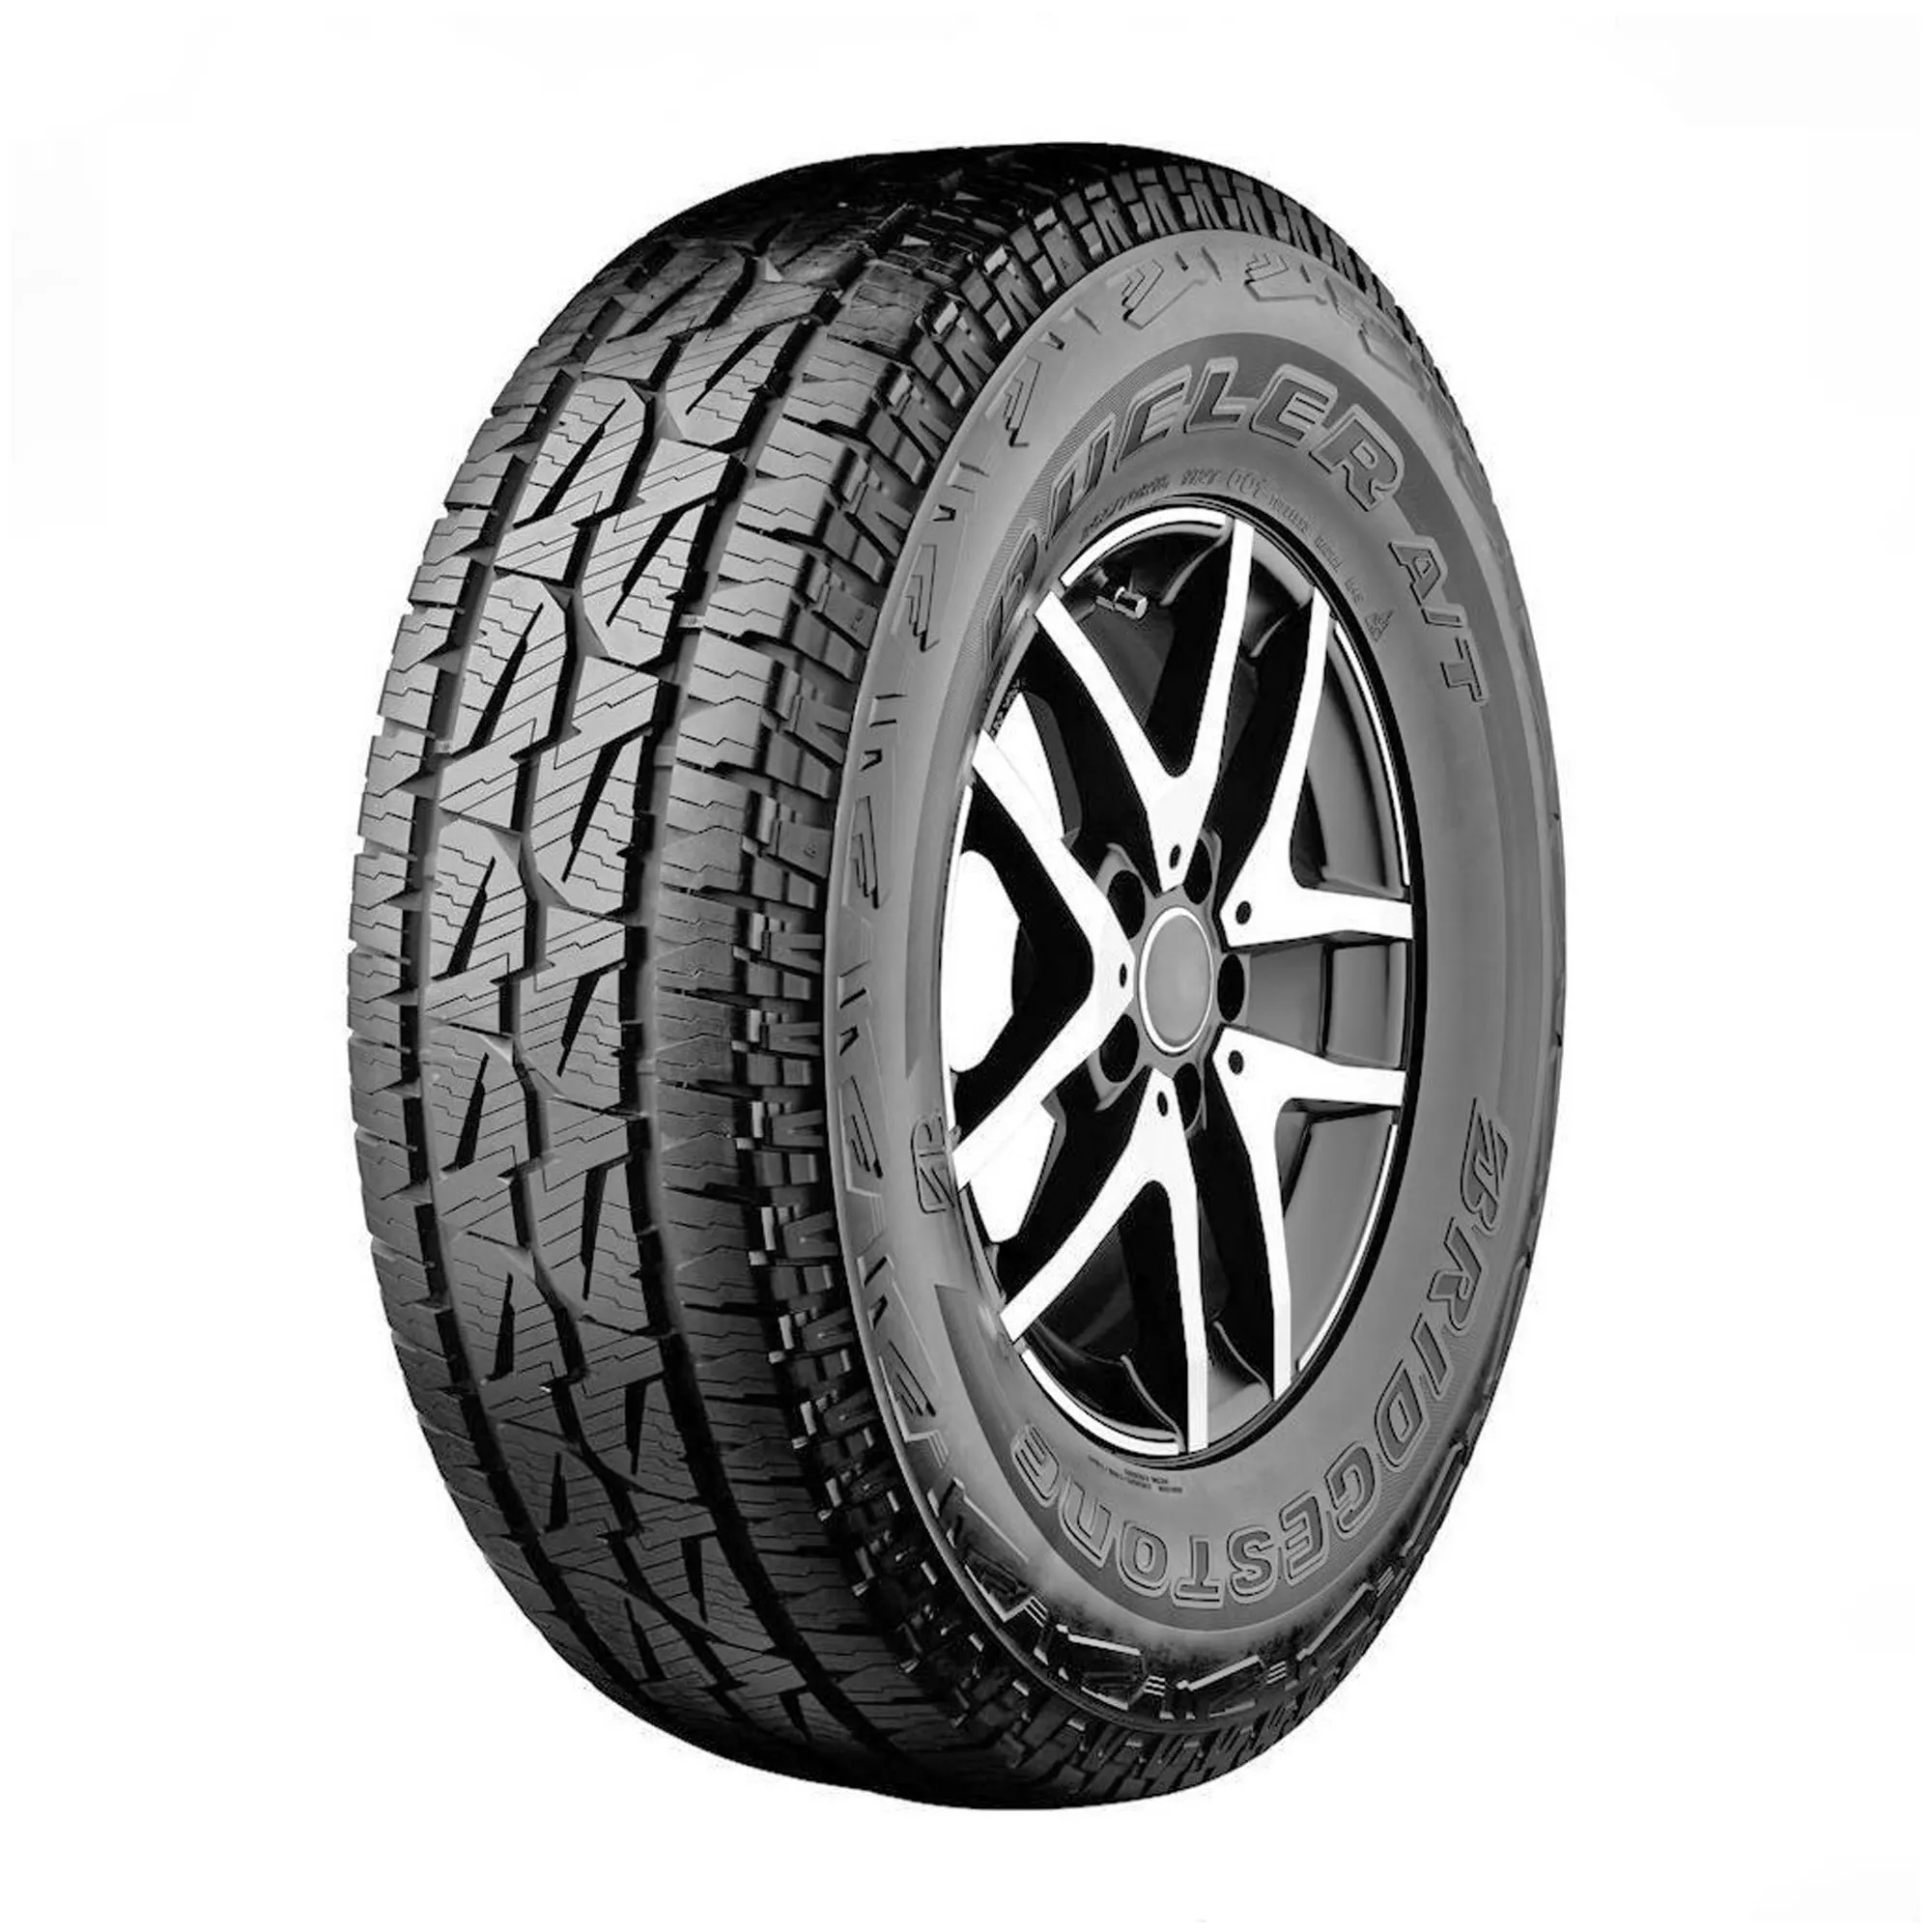 Шина 215/65R16 102S Dueler A/T 001